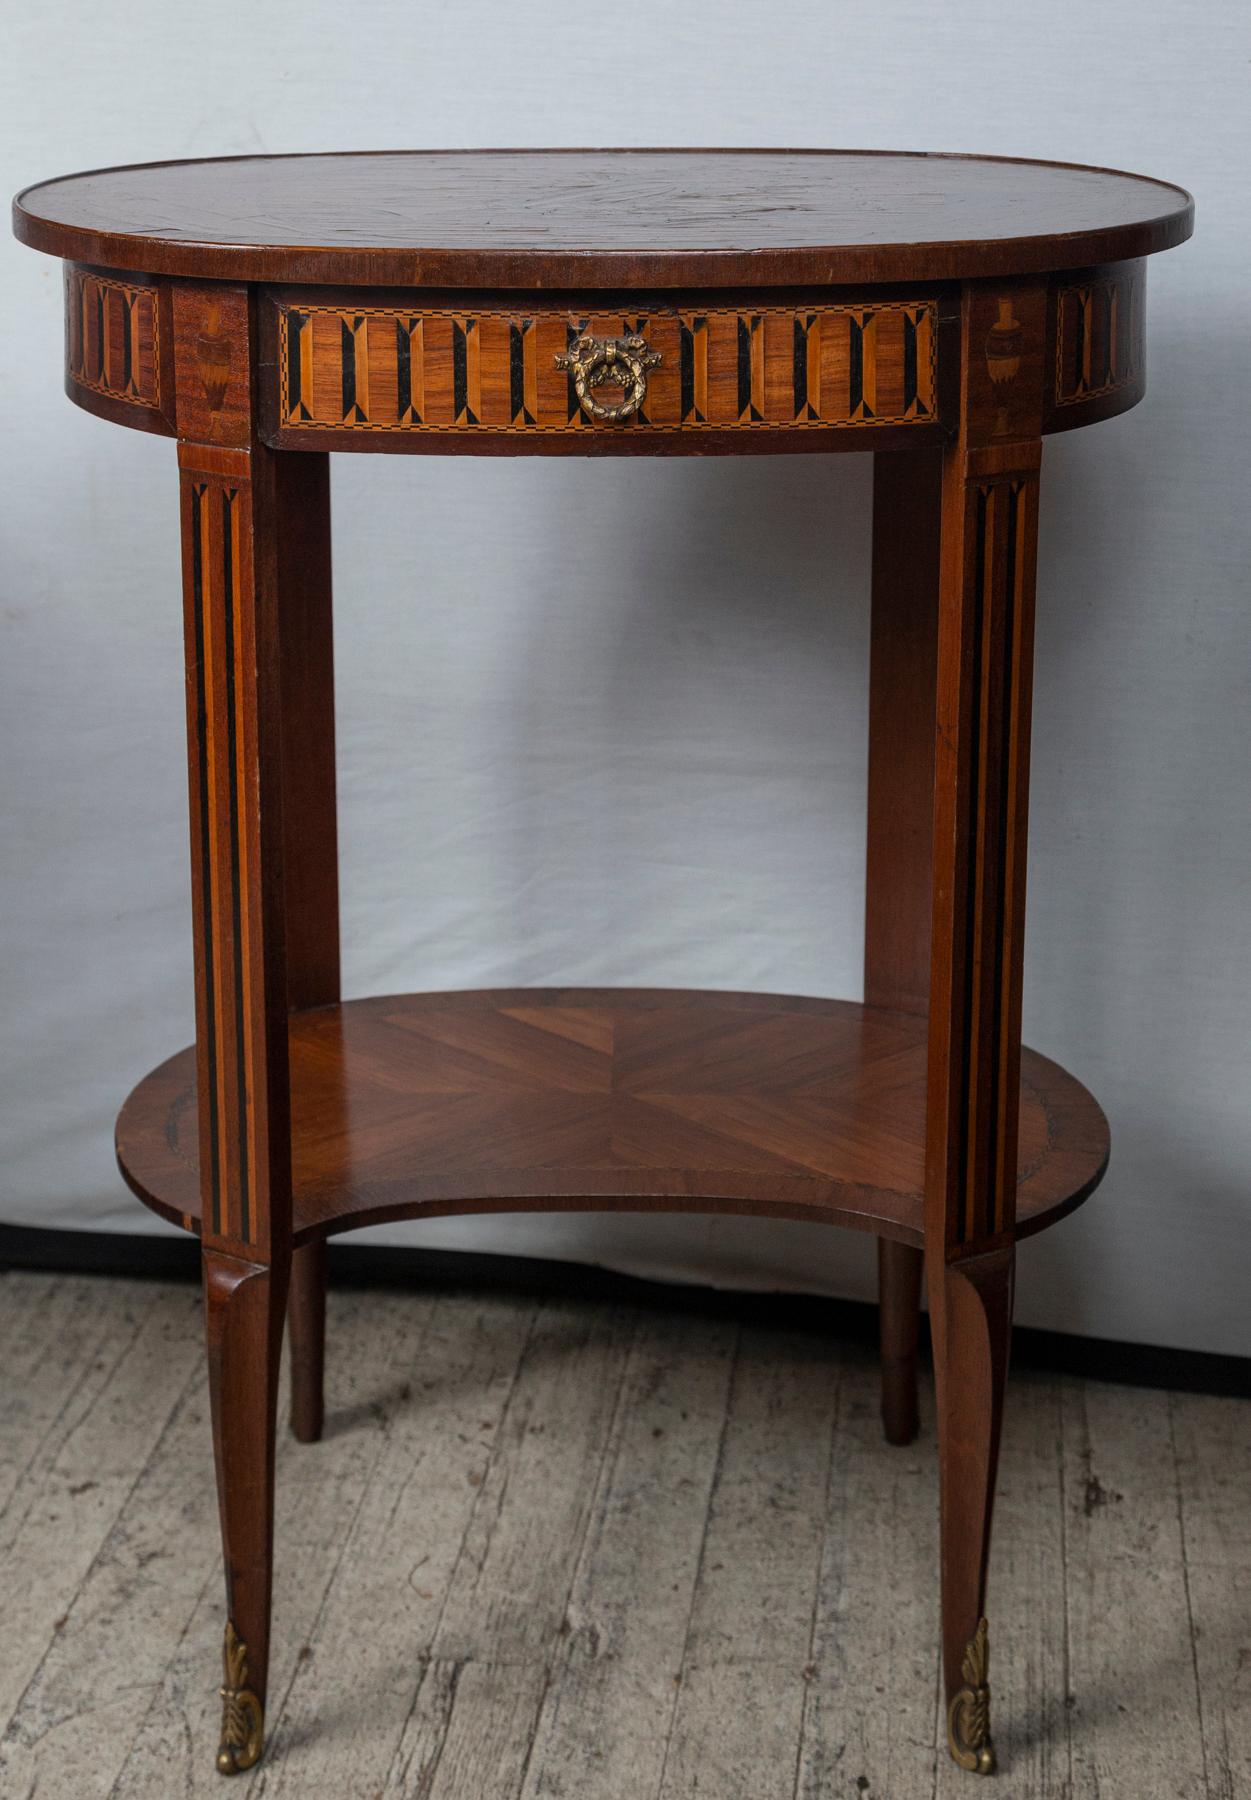 The oval table with transitional Louis XV/XVI legs ending it brass or bronze applied mounts, The lower shaped shelf of mahogany parquetry . The top designed with the same parquetry, surrounding a marquetry center panel , The marquetry of various